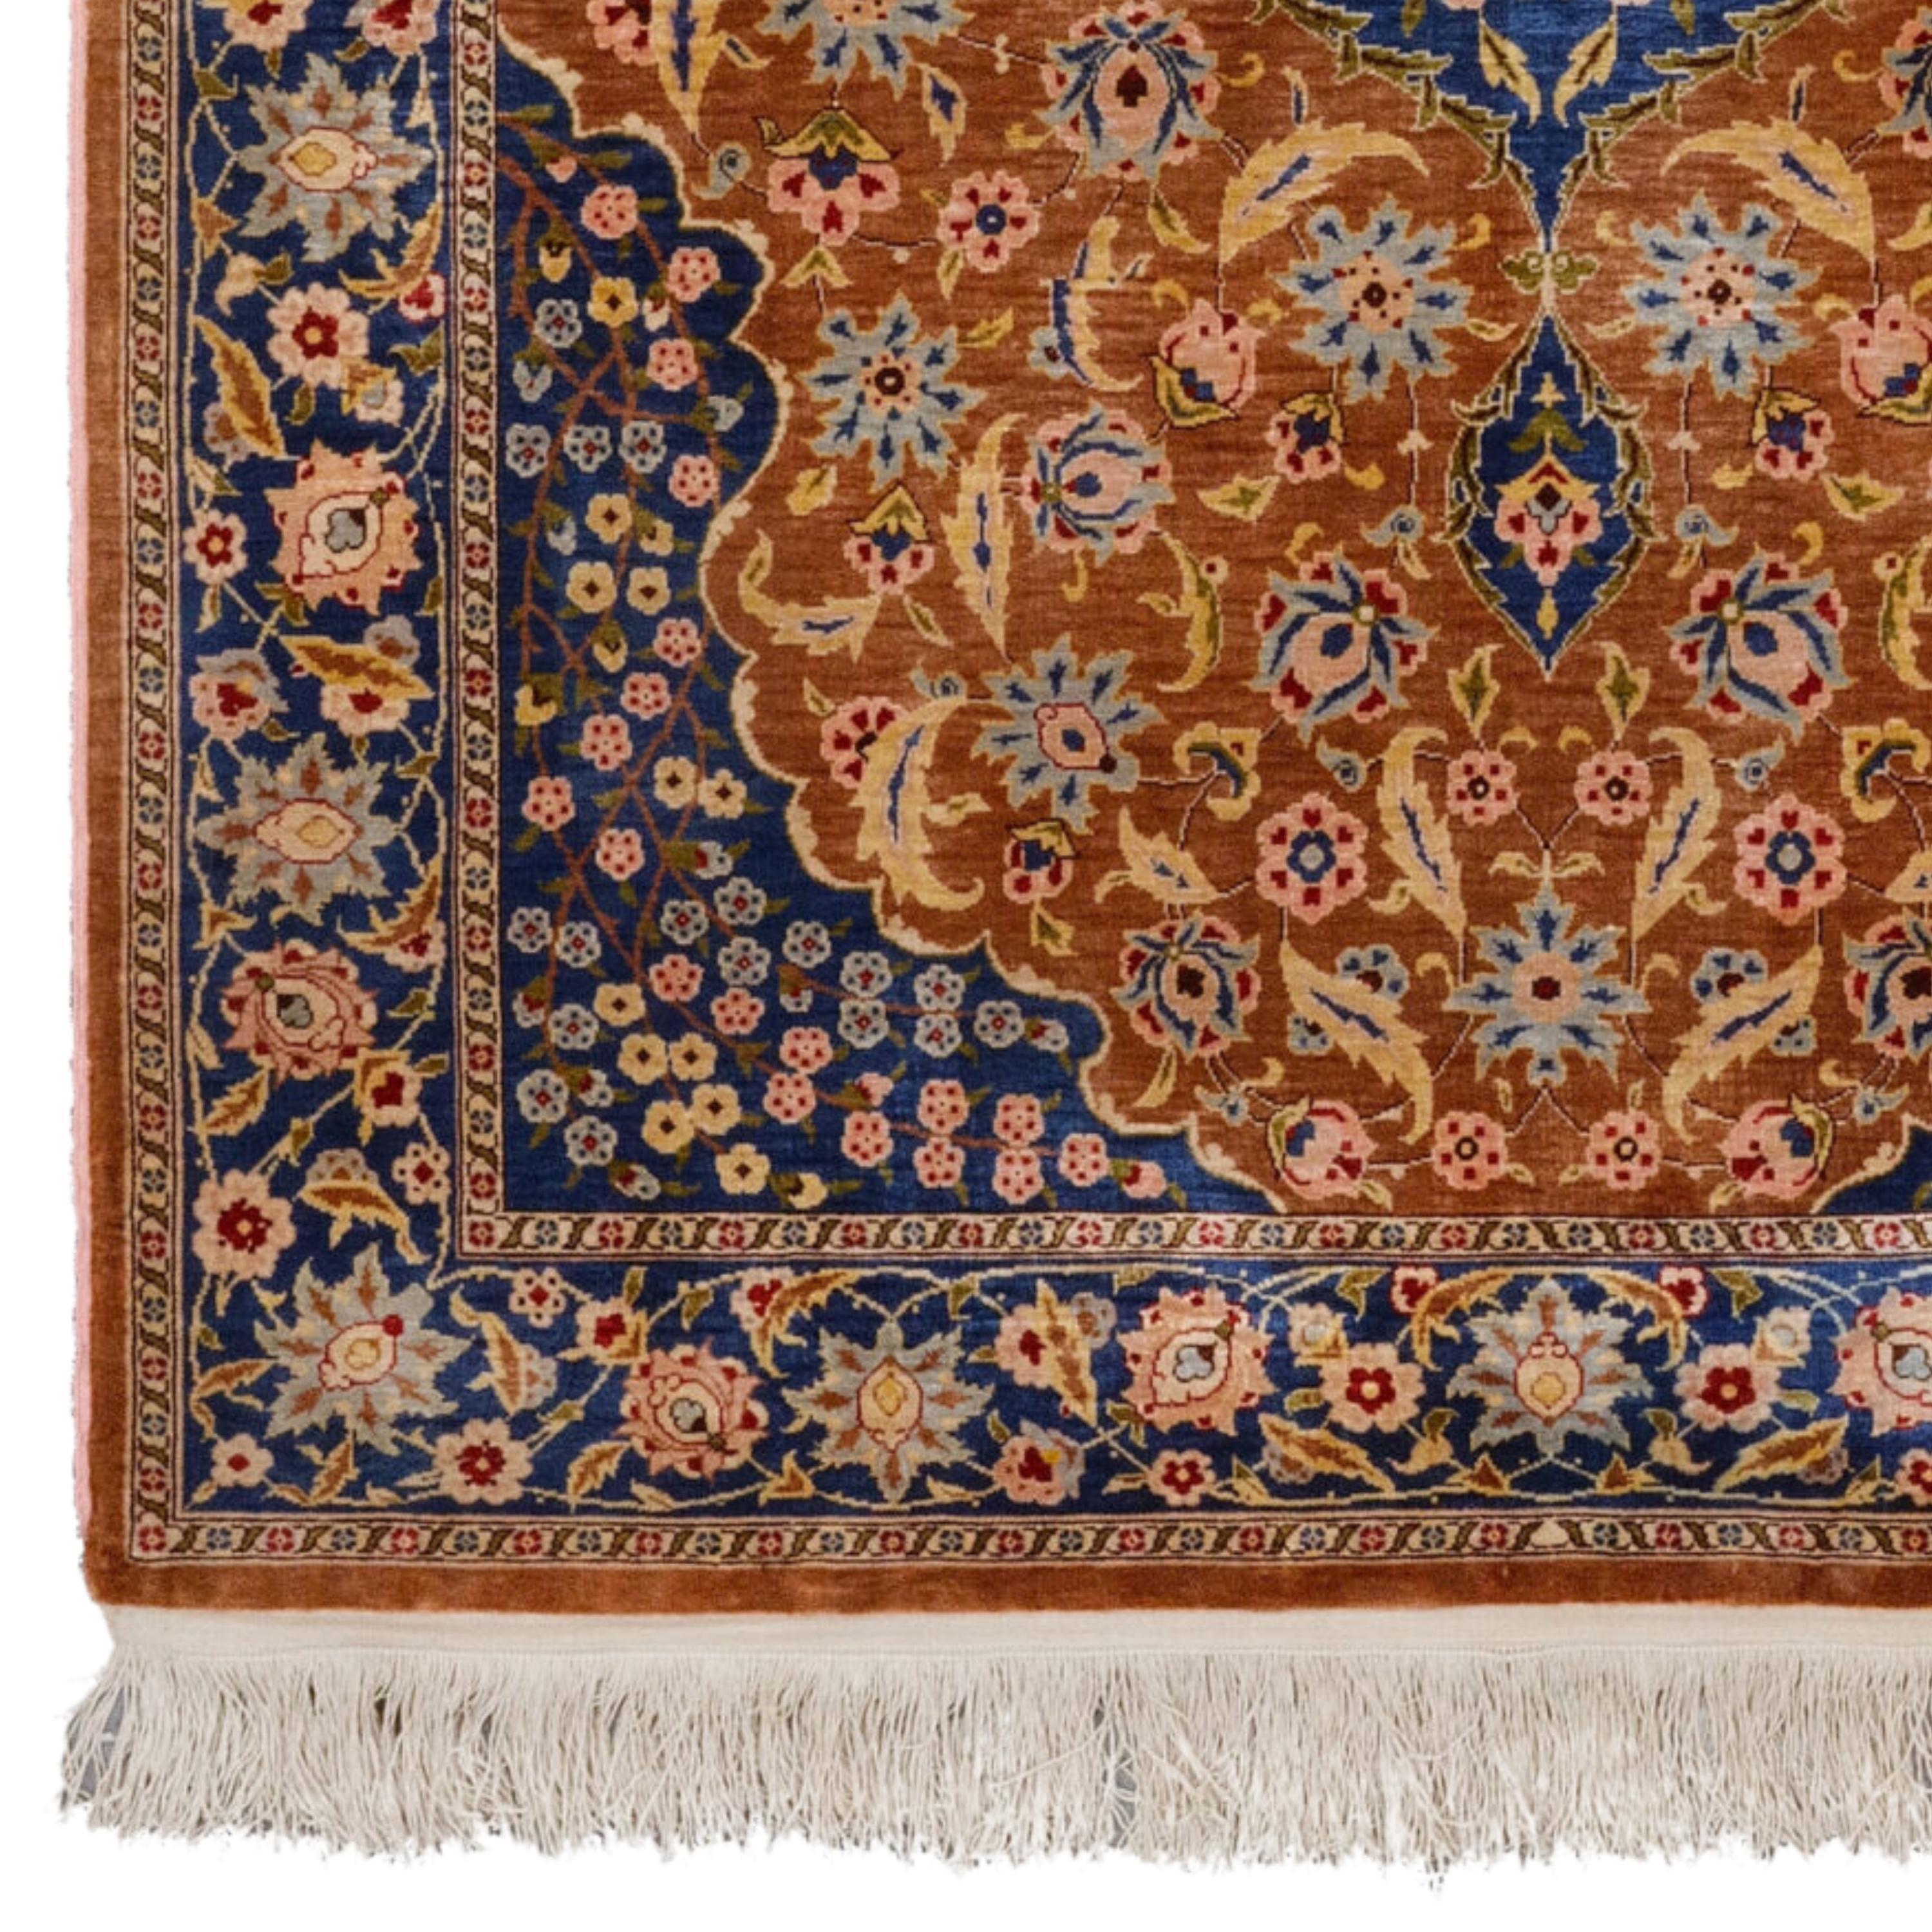 Antique Silk Hereke Rug - Hereke Silk Carpet in Good Condition Size 88 x 128 cm (2,88 x 4,19 ft)

Hereke carpet, floor covering handwoven in imperial workshops founded late in the 19th century at Hereke, Turkey, about 40 miles (64 km) east of